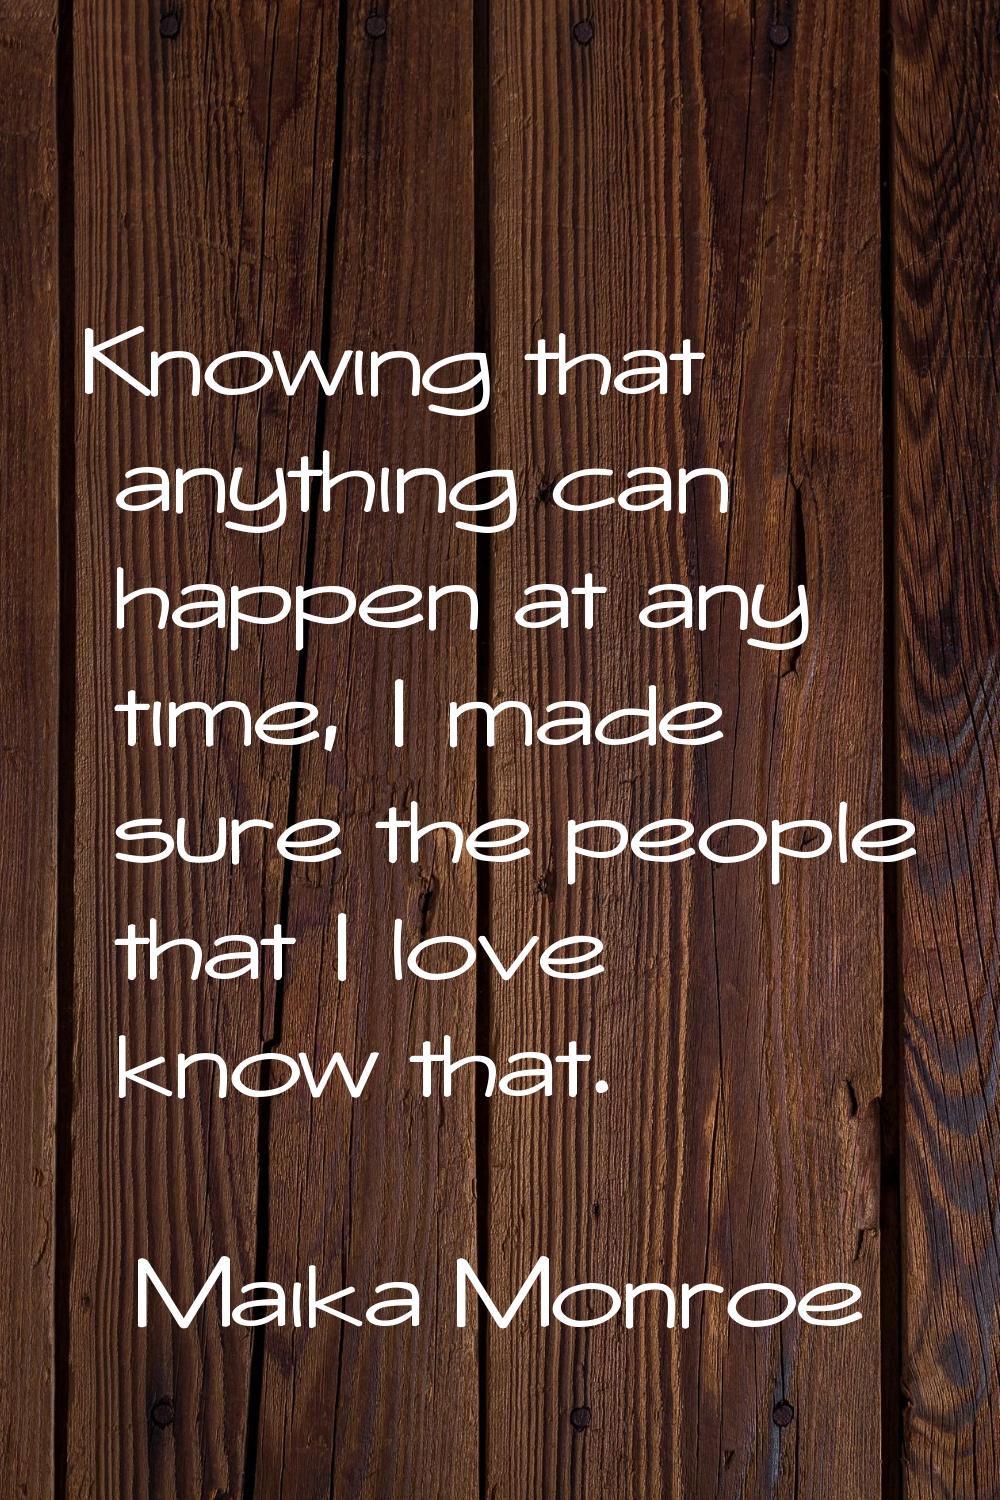 Knowing that anything can happen at any time, I made sure the people that I love know that.